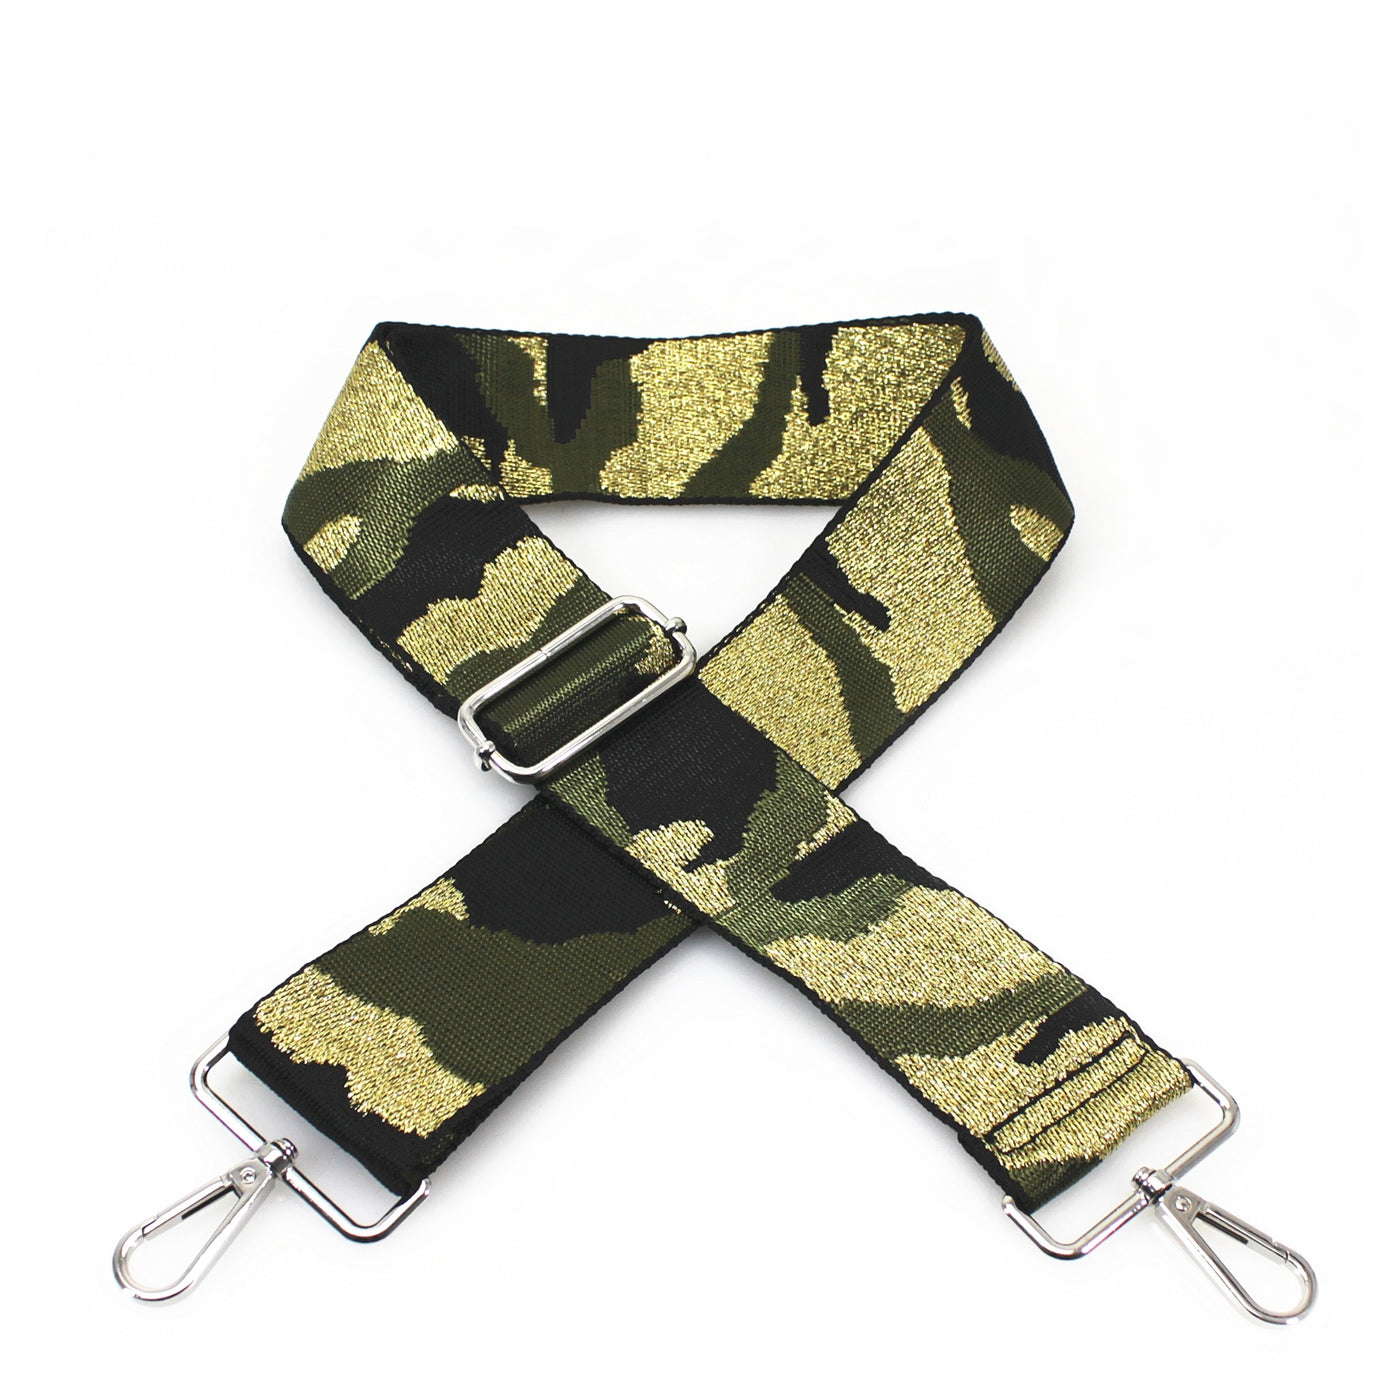 Army Camo Print Glitter Bag Strap - Khaki Green/Gold with Silver Fittings